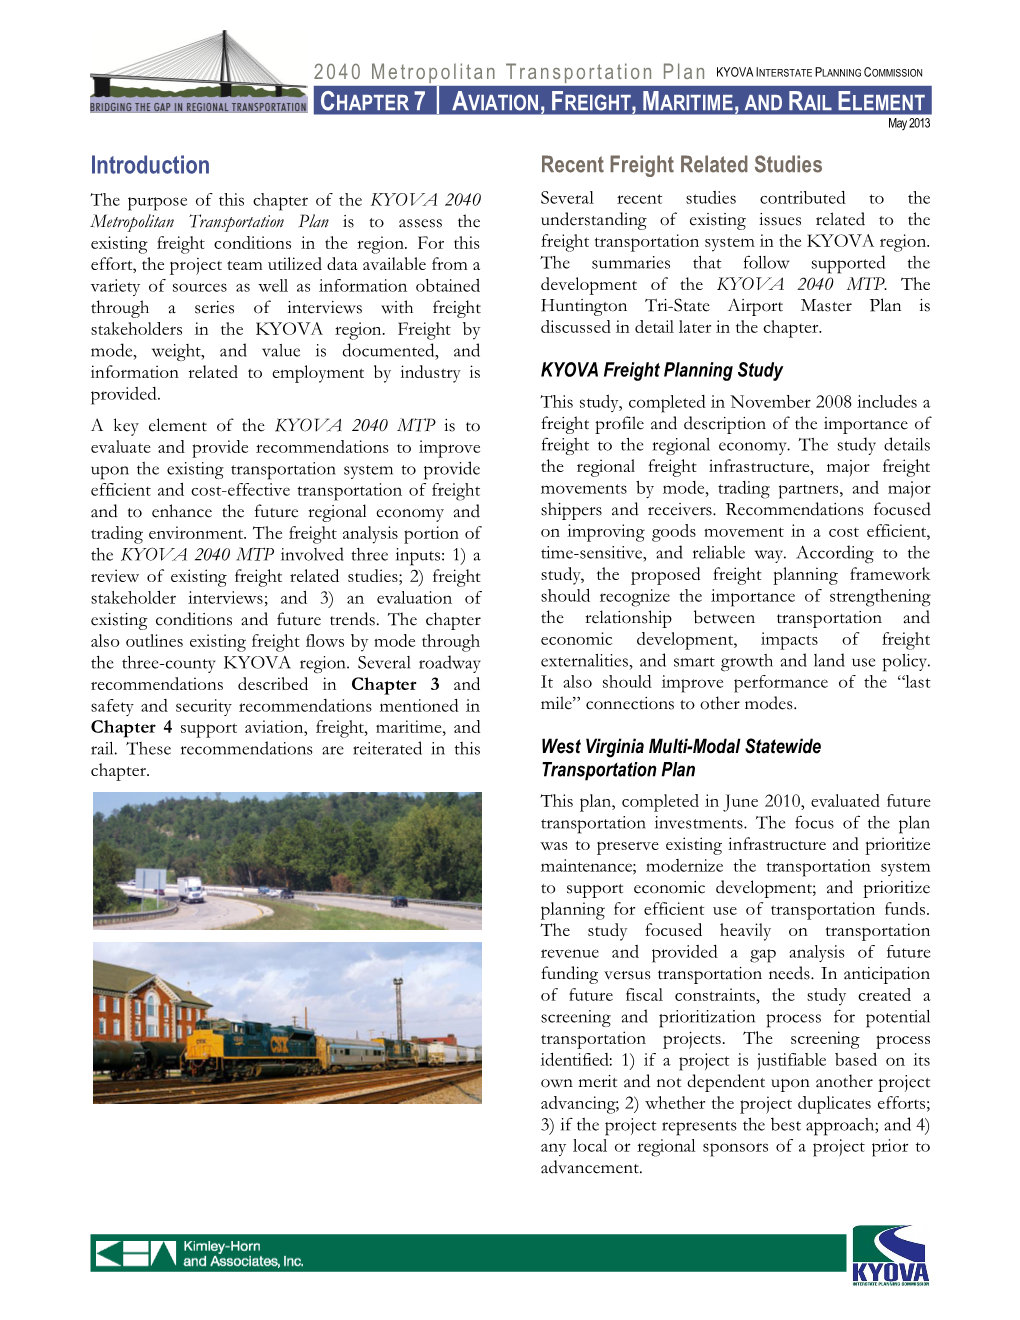 2040 MTP Chapter 7 Aviation, Freight, Maritime and Rail Element